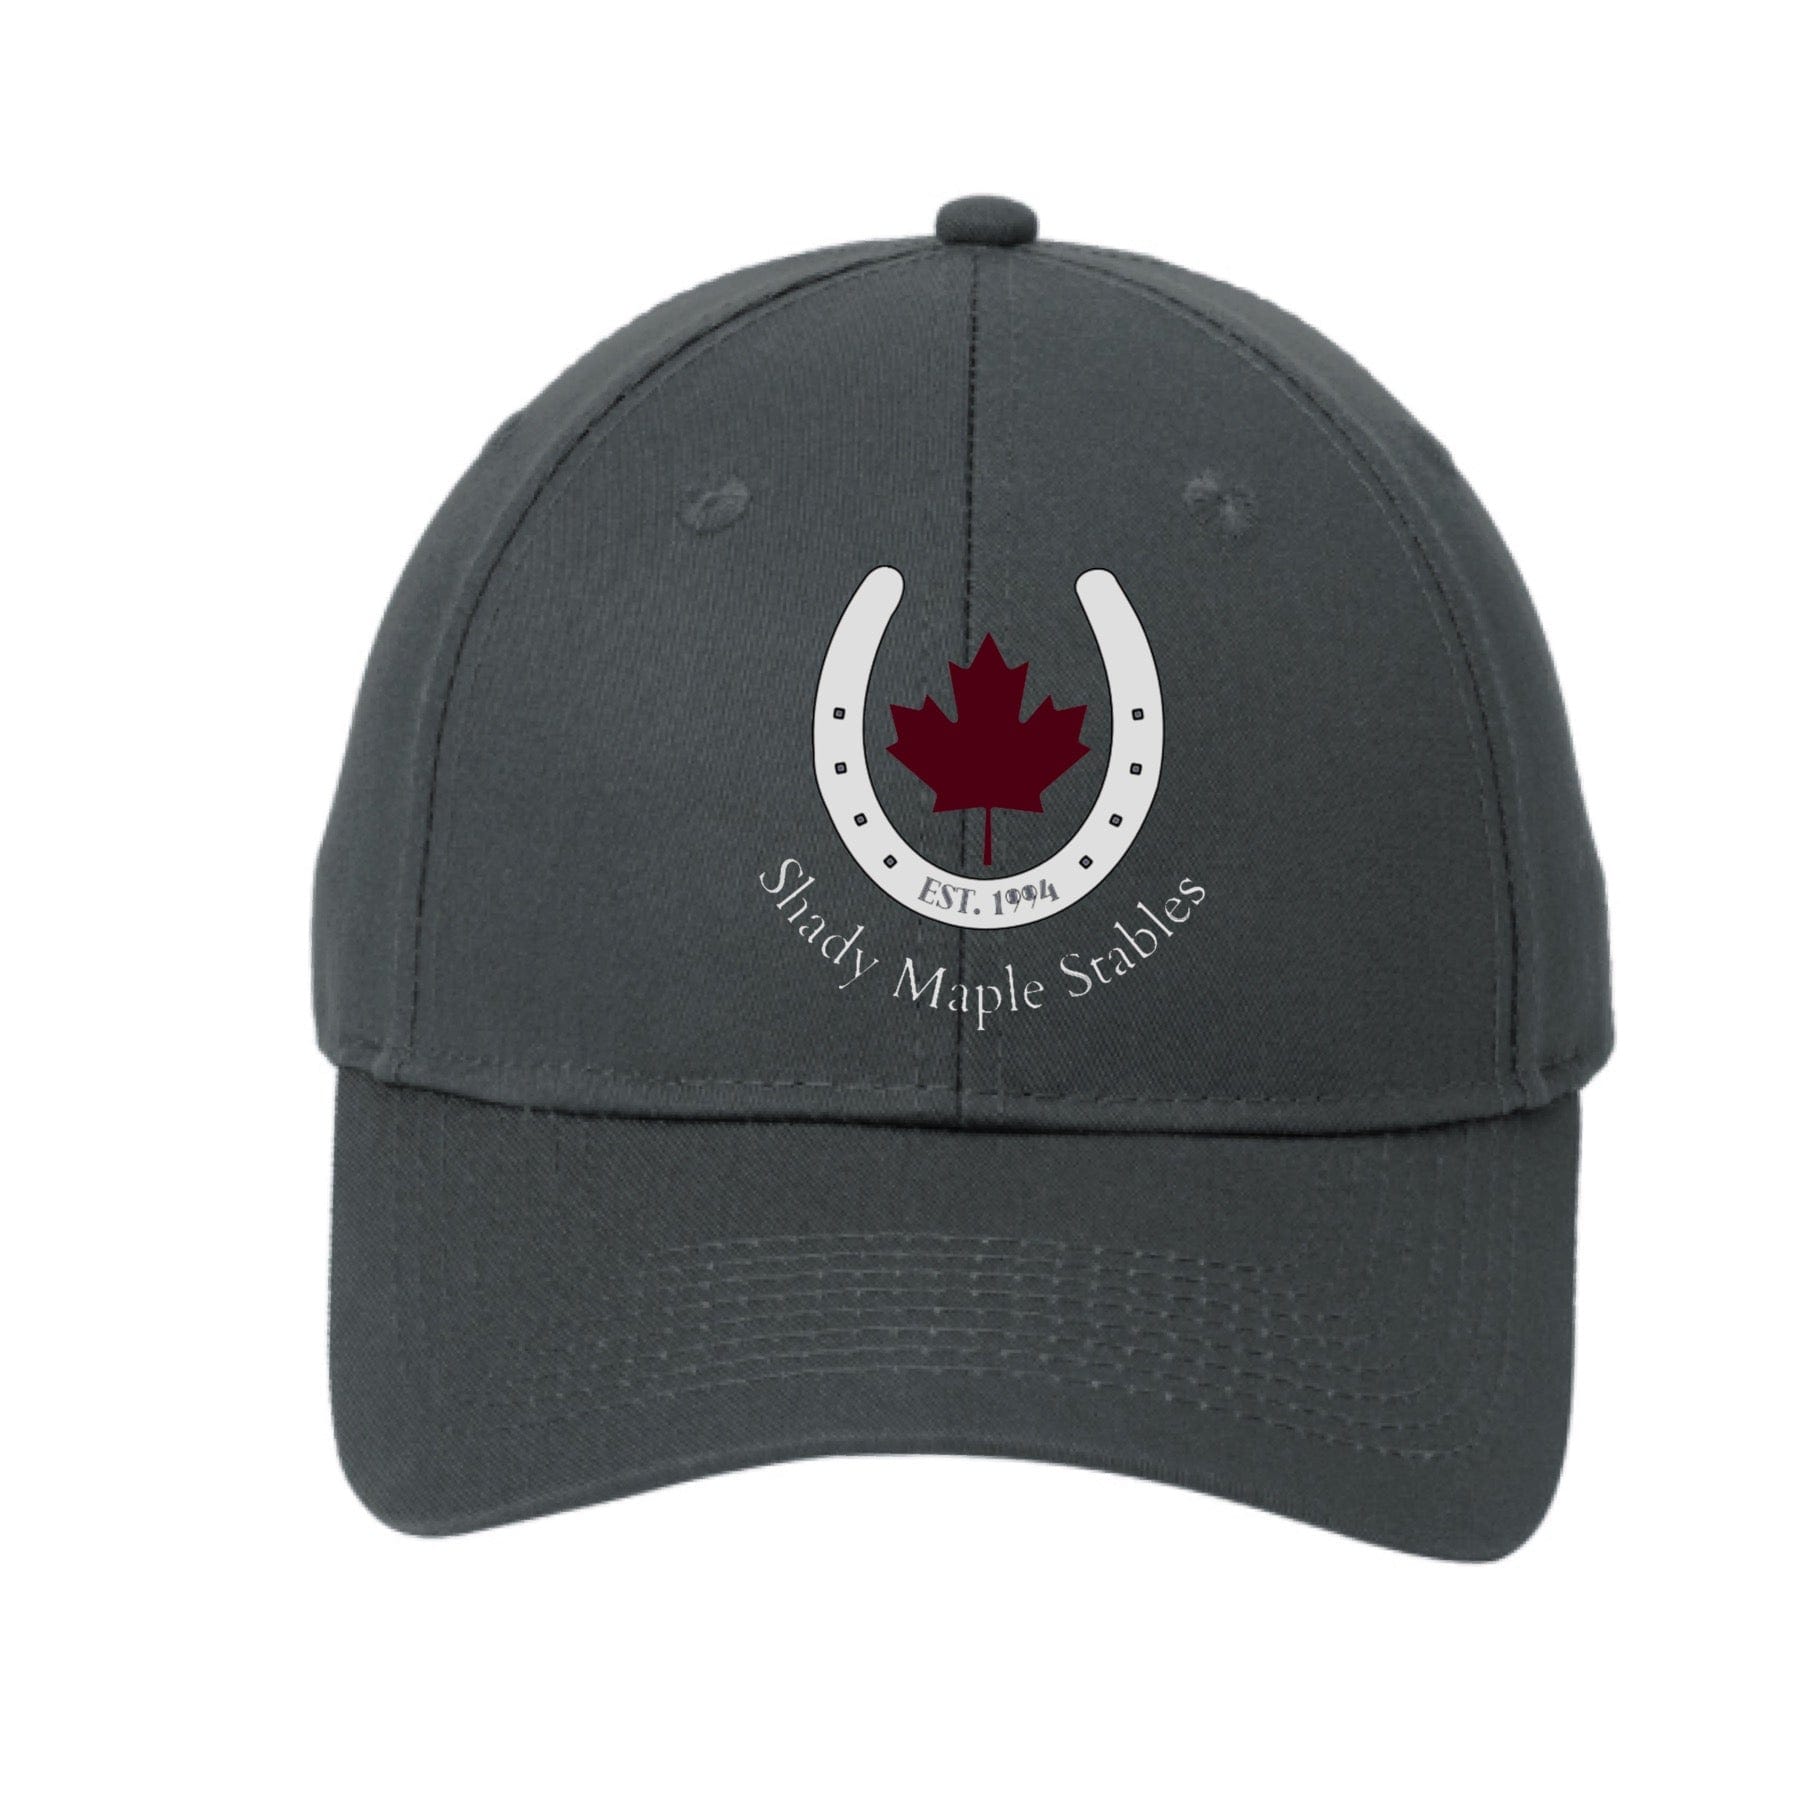 Equestrian Team Apparel Shady Maple Stables Baseball cap equestrian team apparel online tack store mobile tack store custom farm apparel custom show stable clothing equestrian lifestyle horse show clothing riding clothes horses equestrian tack store